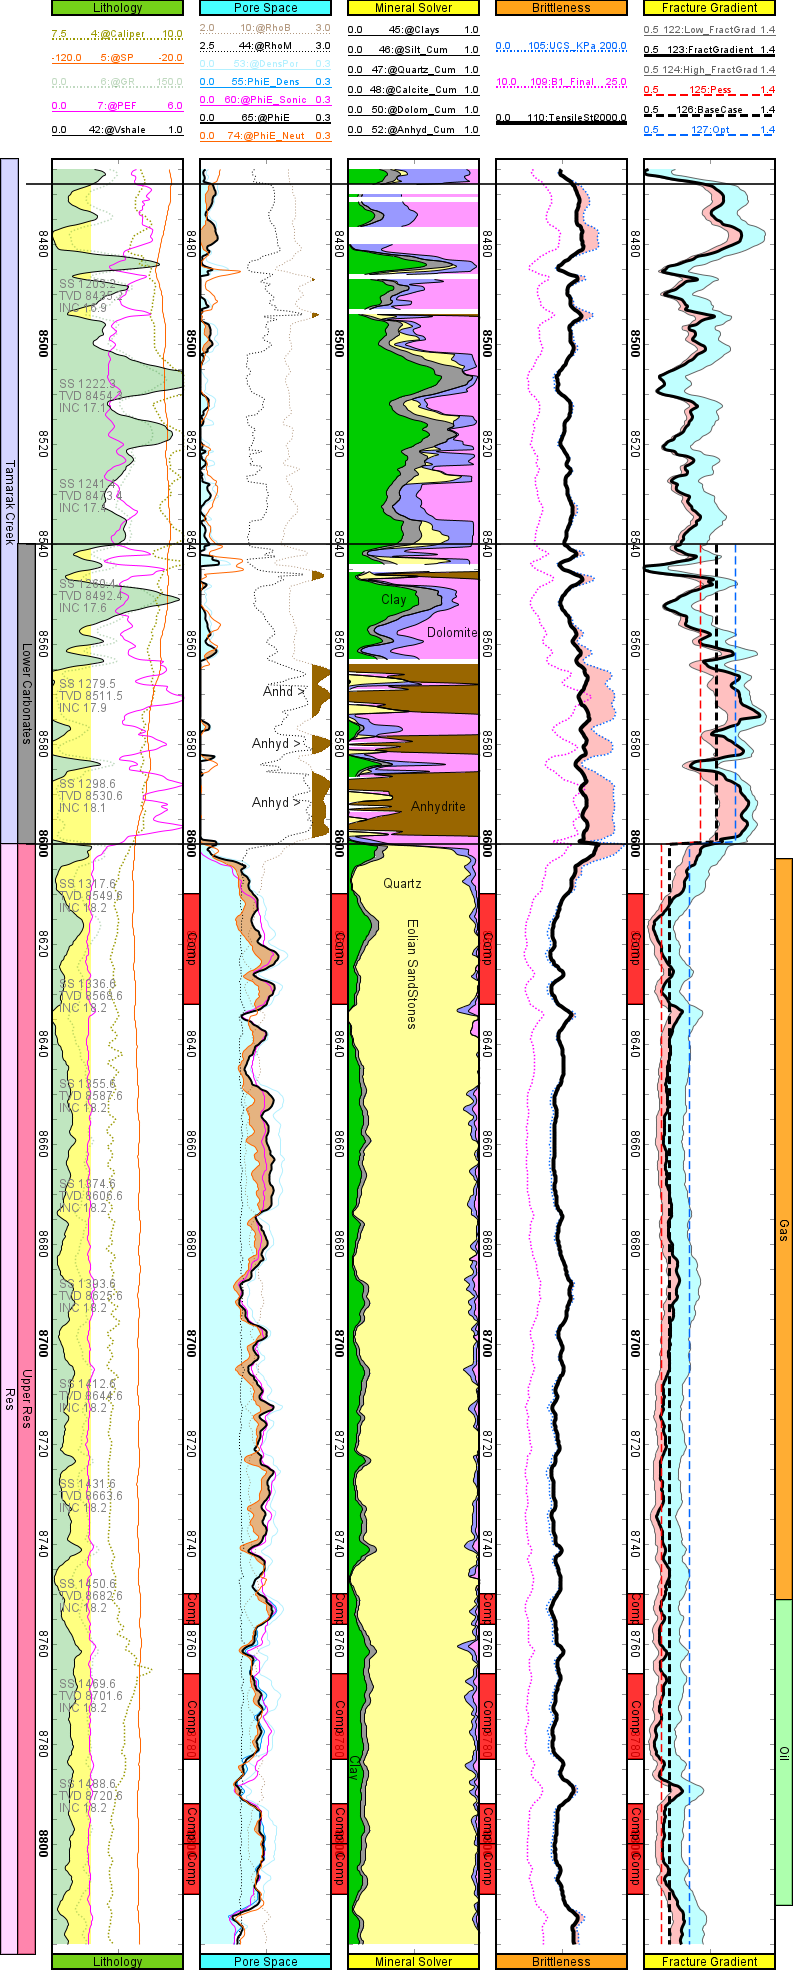 GeolOil log plot of a geomechanical study for fracture gradient and rock strength